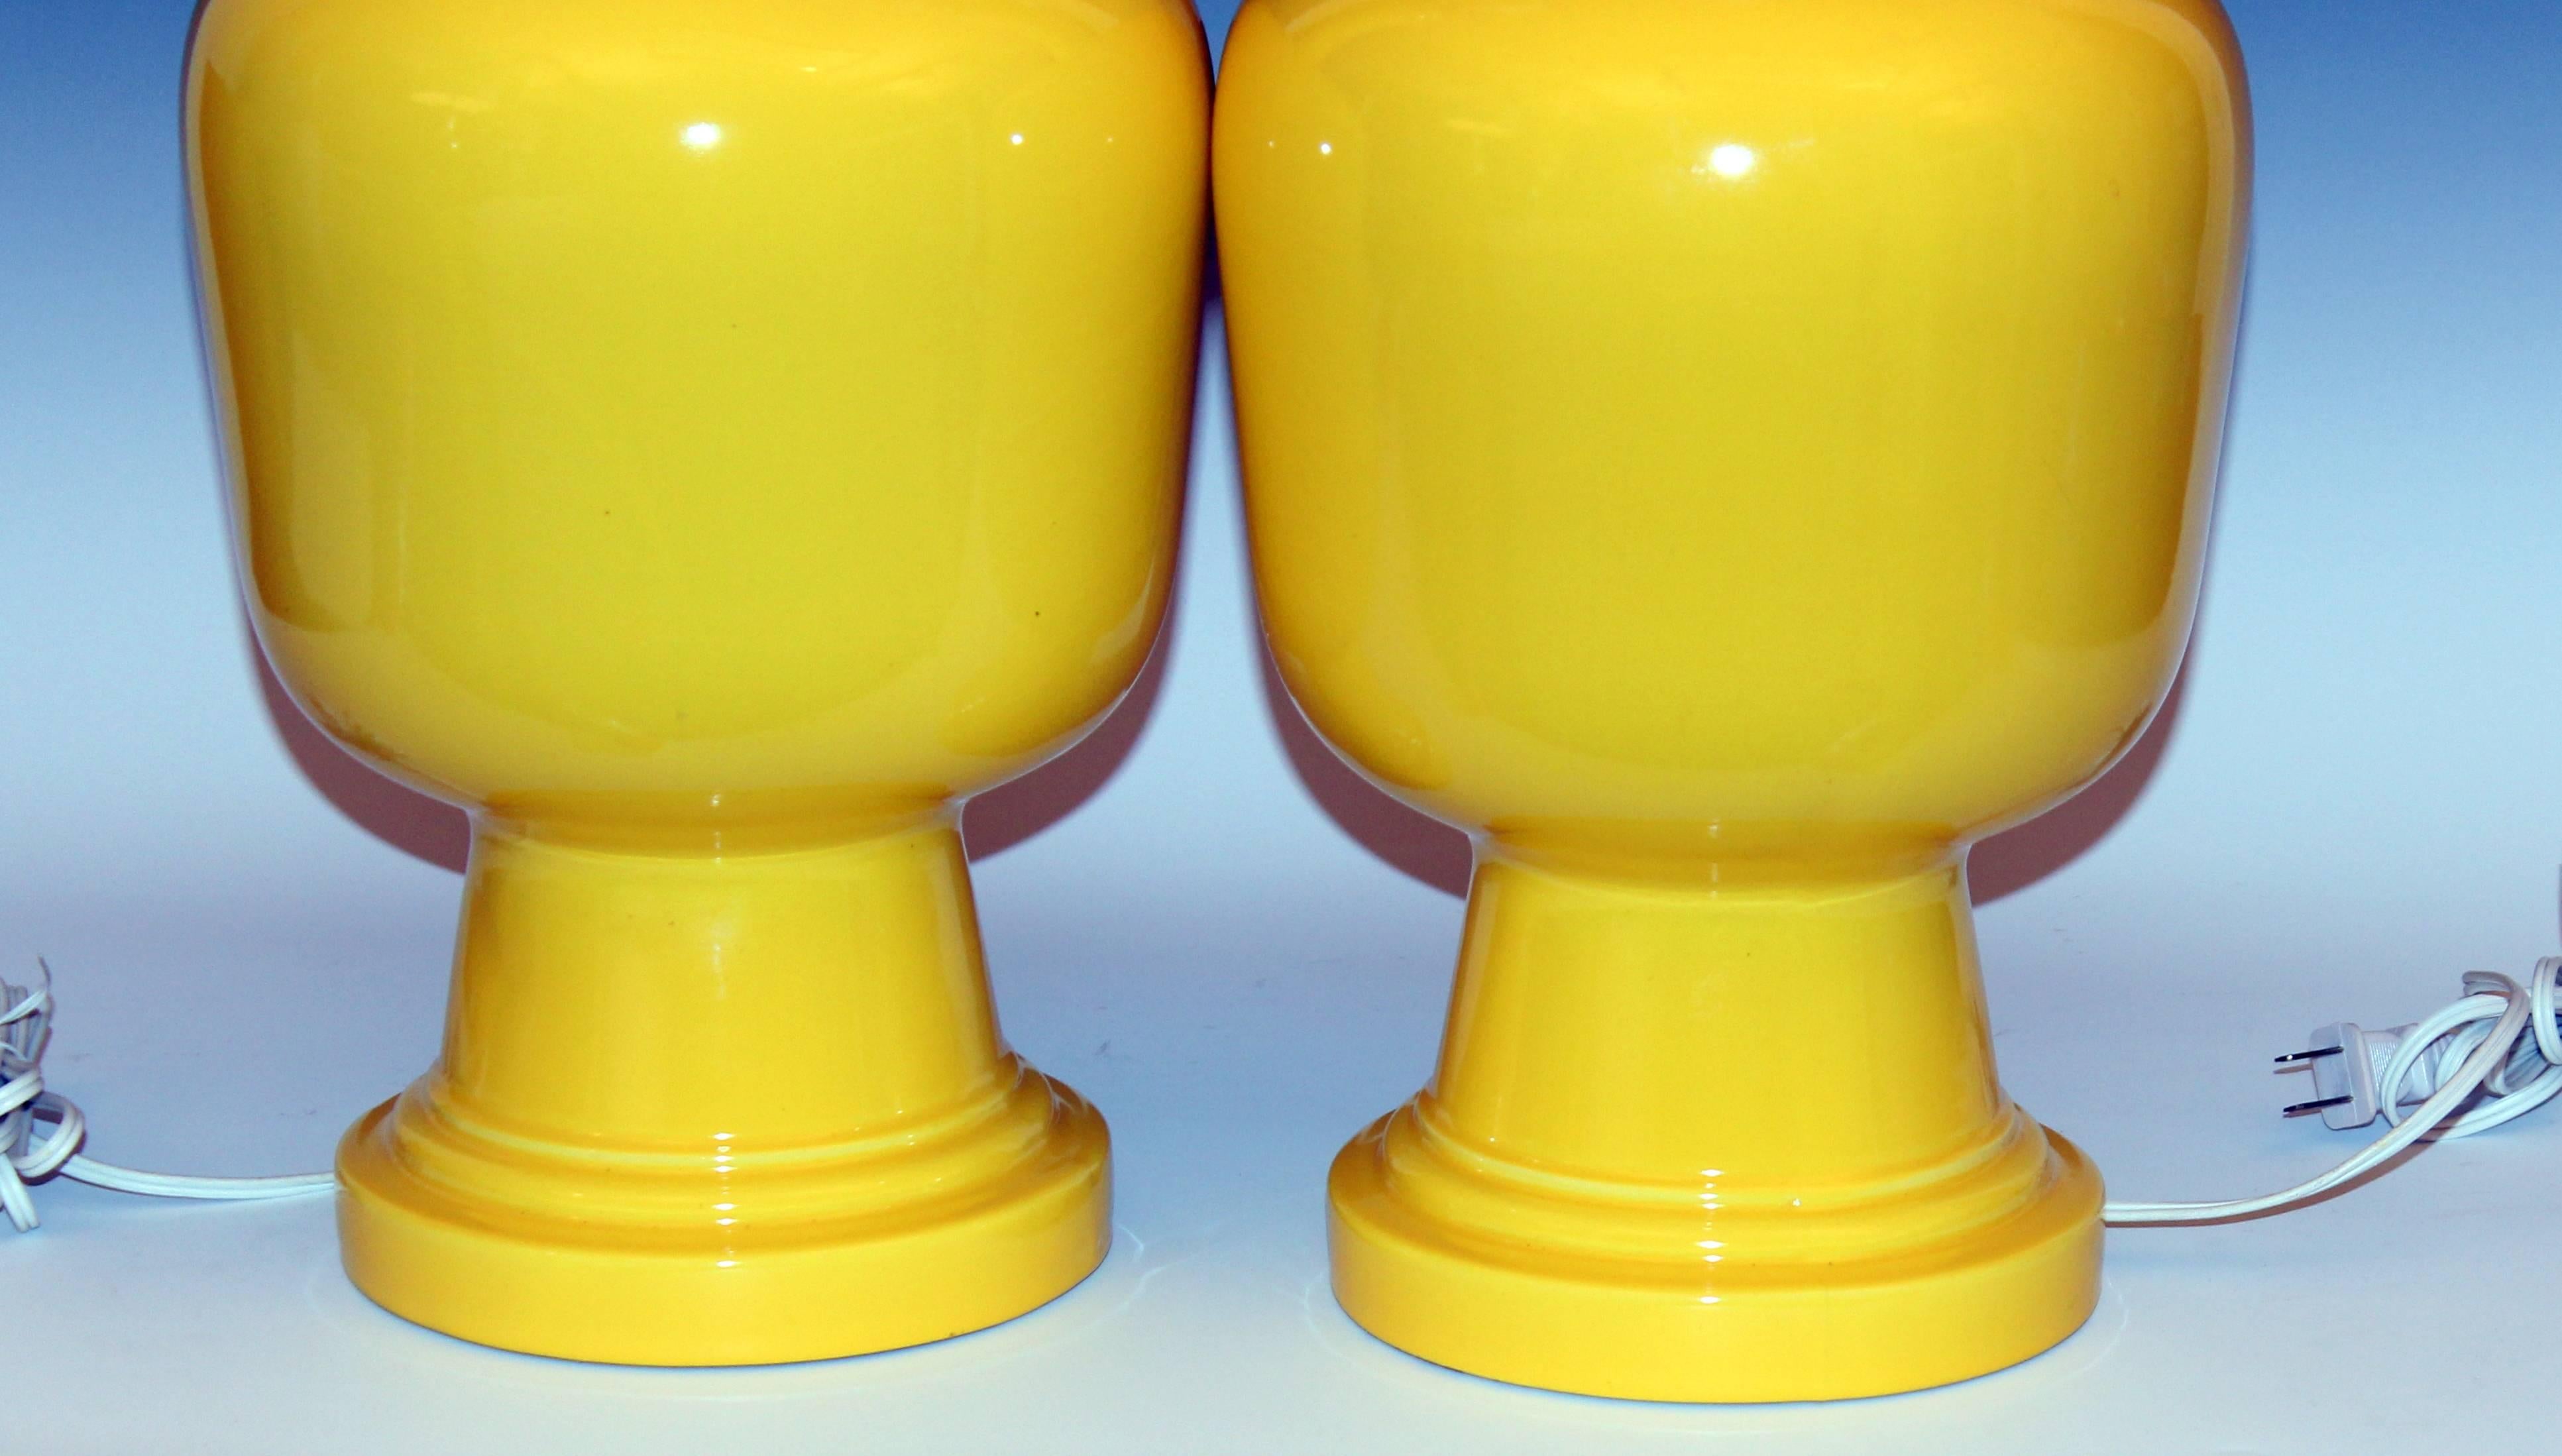 Late 20th Century Pair of Vintage Organic Form Atomic Chrome Yellow Pottery Lamps